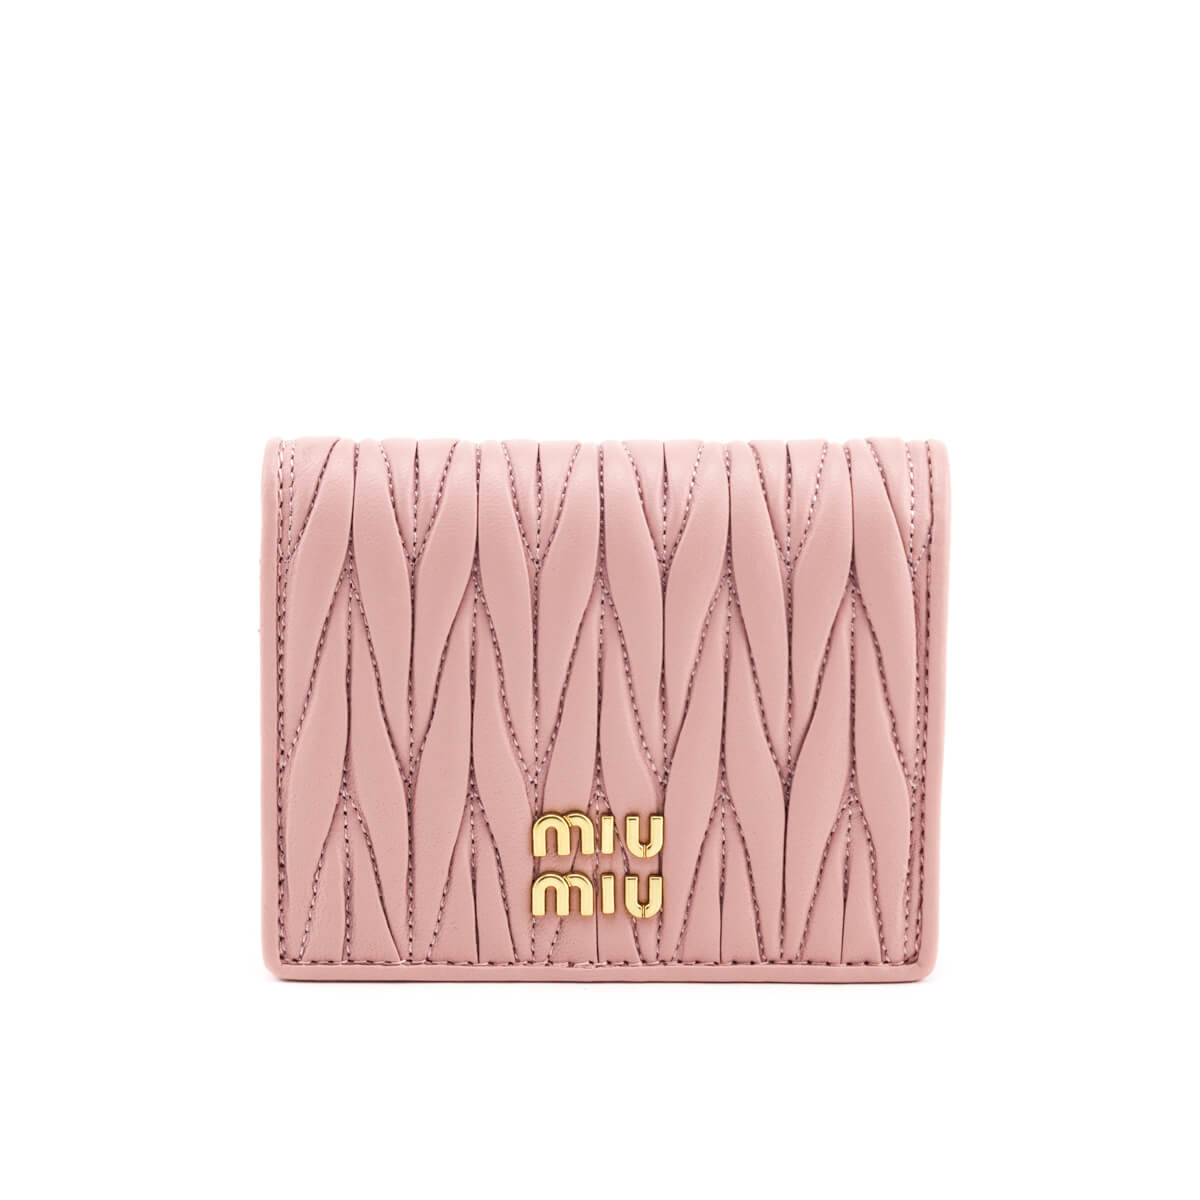 Miu Miu Pink Nappa Leather Matellasse Small Wallet - Love that Bag etc - Preowned Authentic Designer Handbags & Preloved Fashions